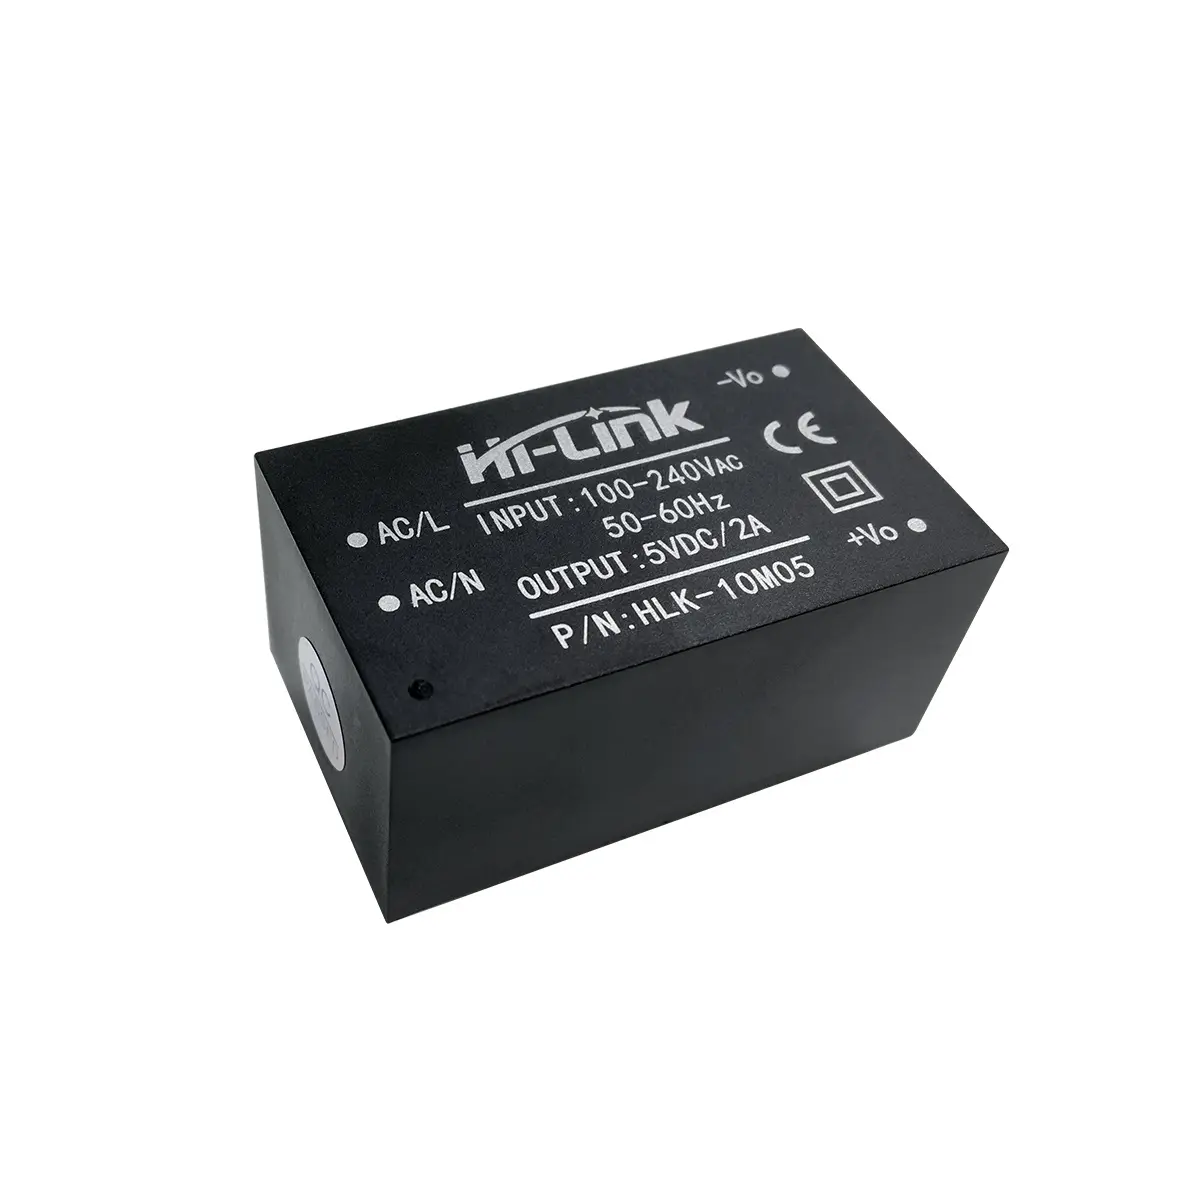 Hi-Link 220v 5V 10W 2A AC DC isolated switching step down power supply module AC DC converter module HLK-10M05